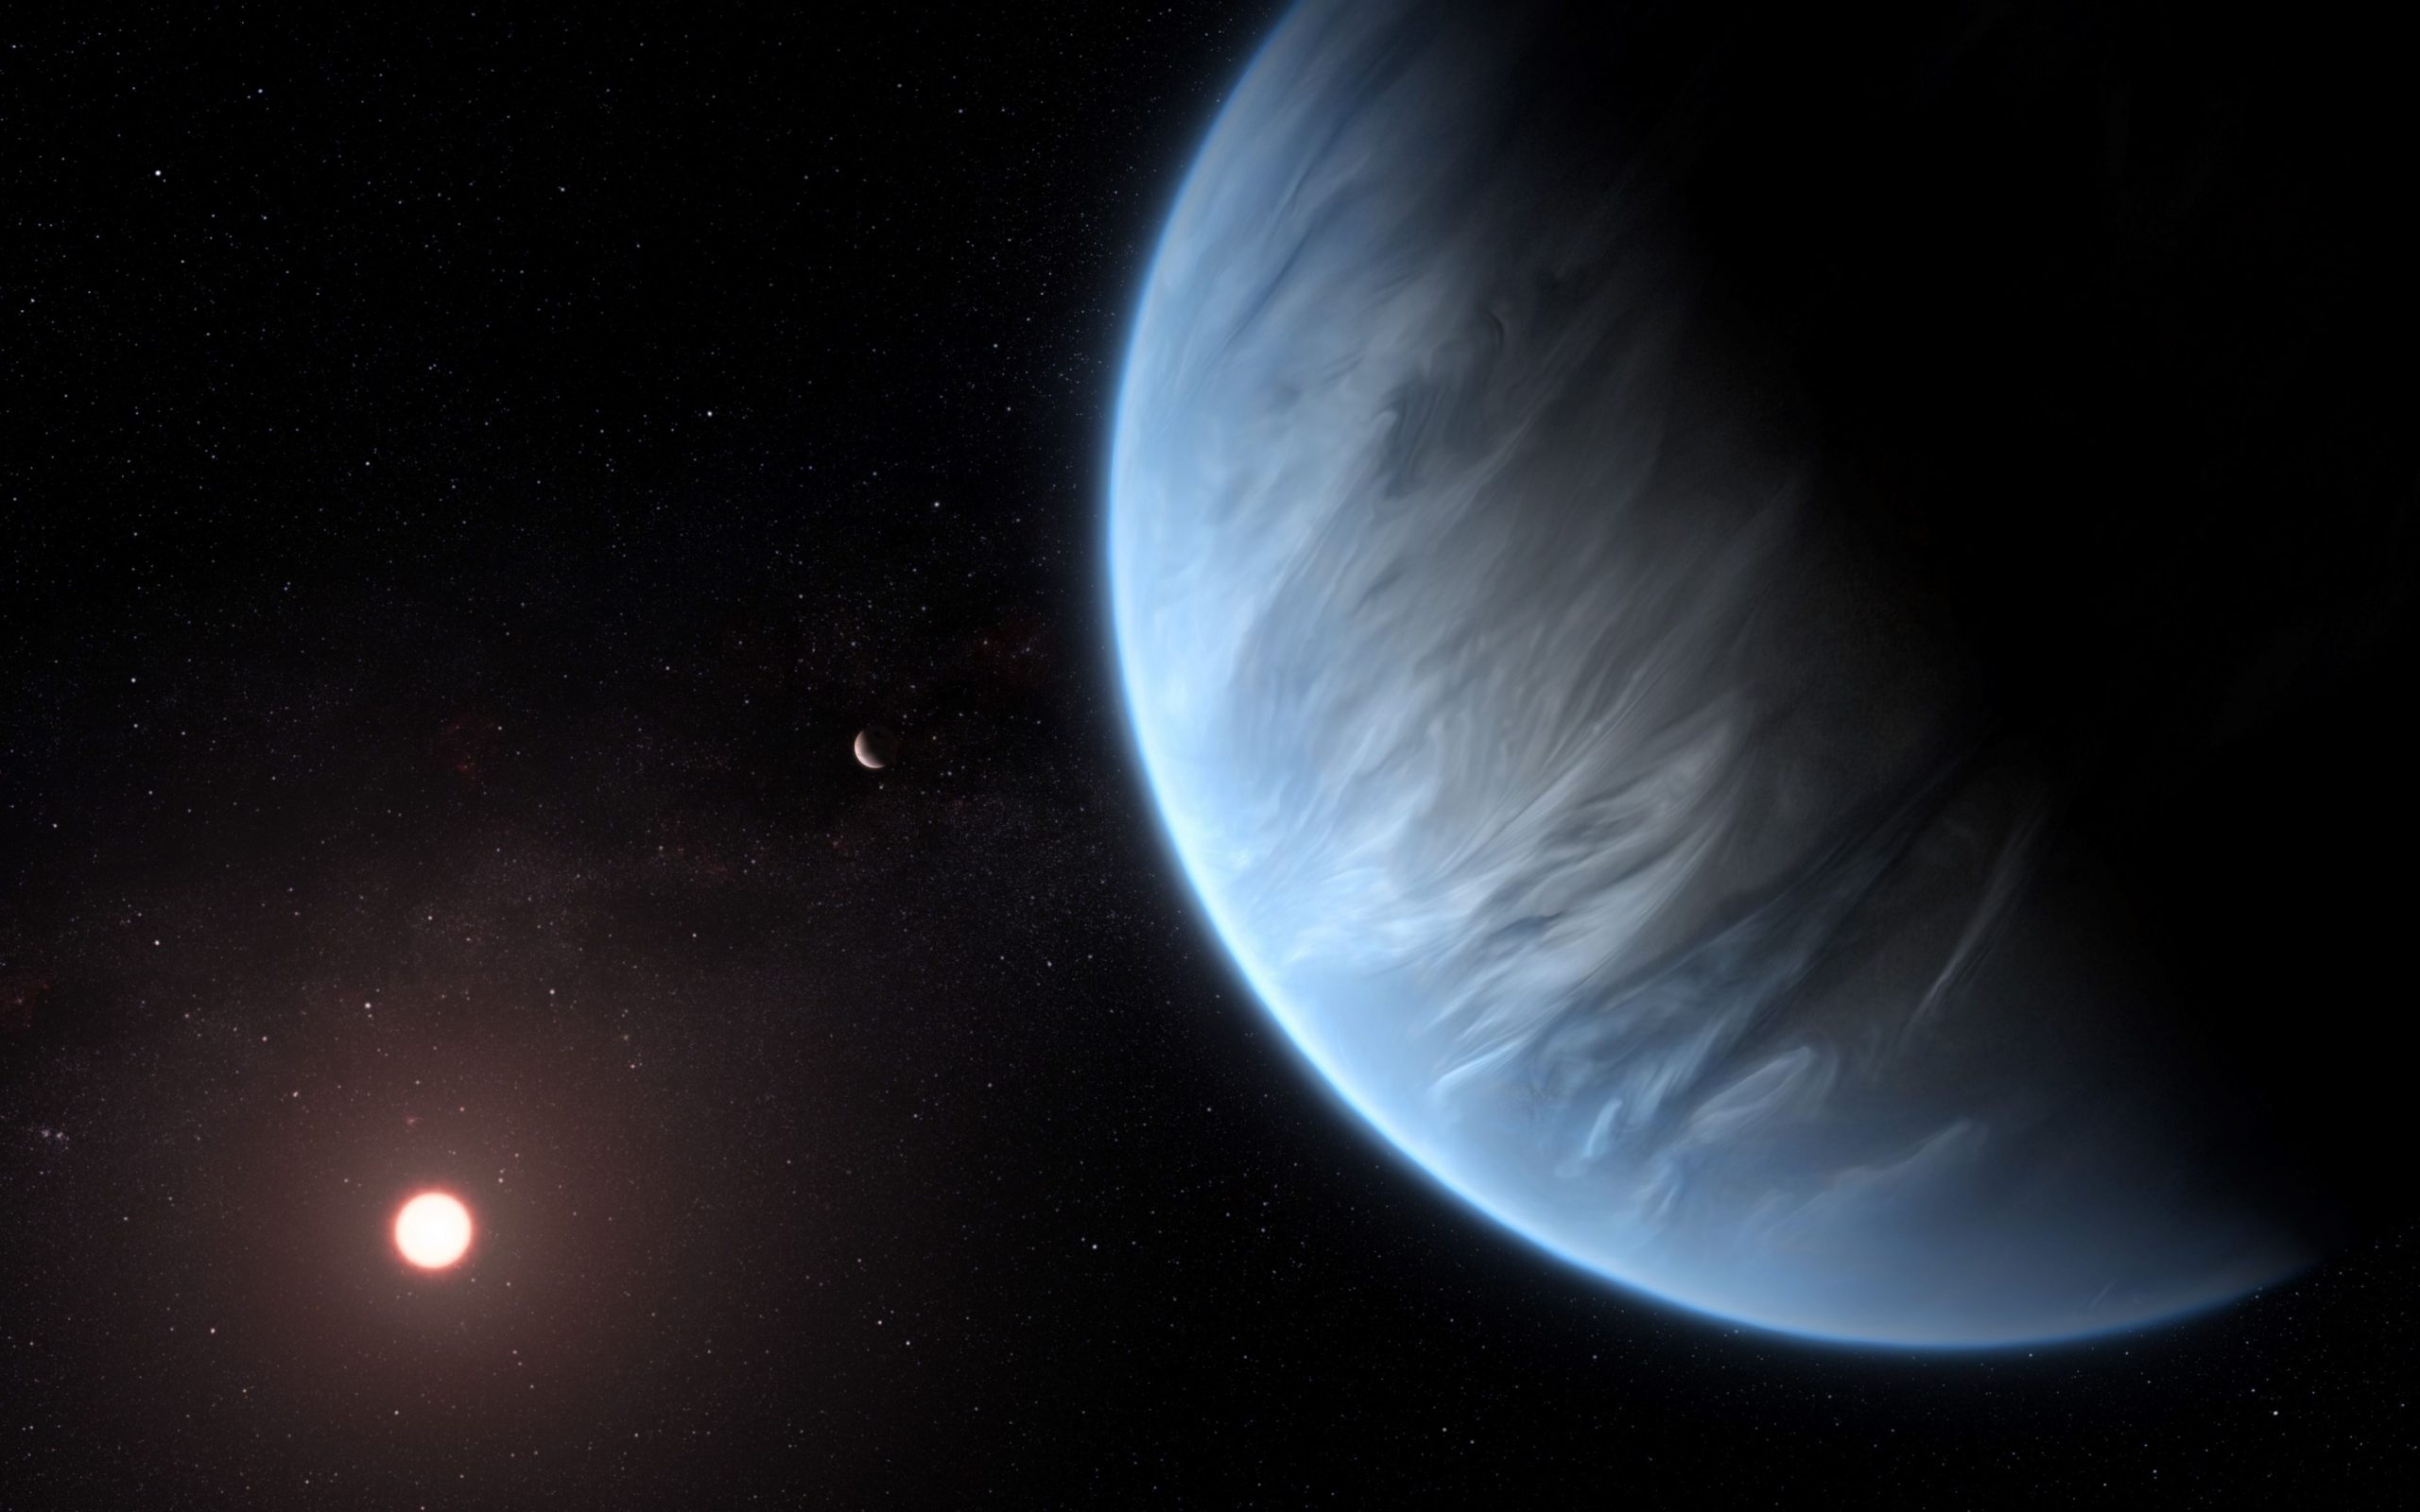 24 superhabitable planets discovered close to Earth

